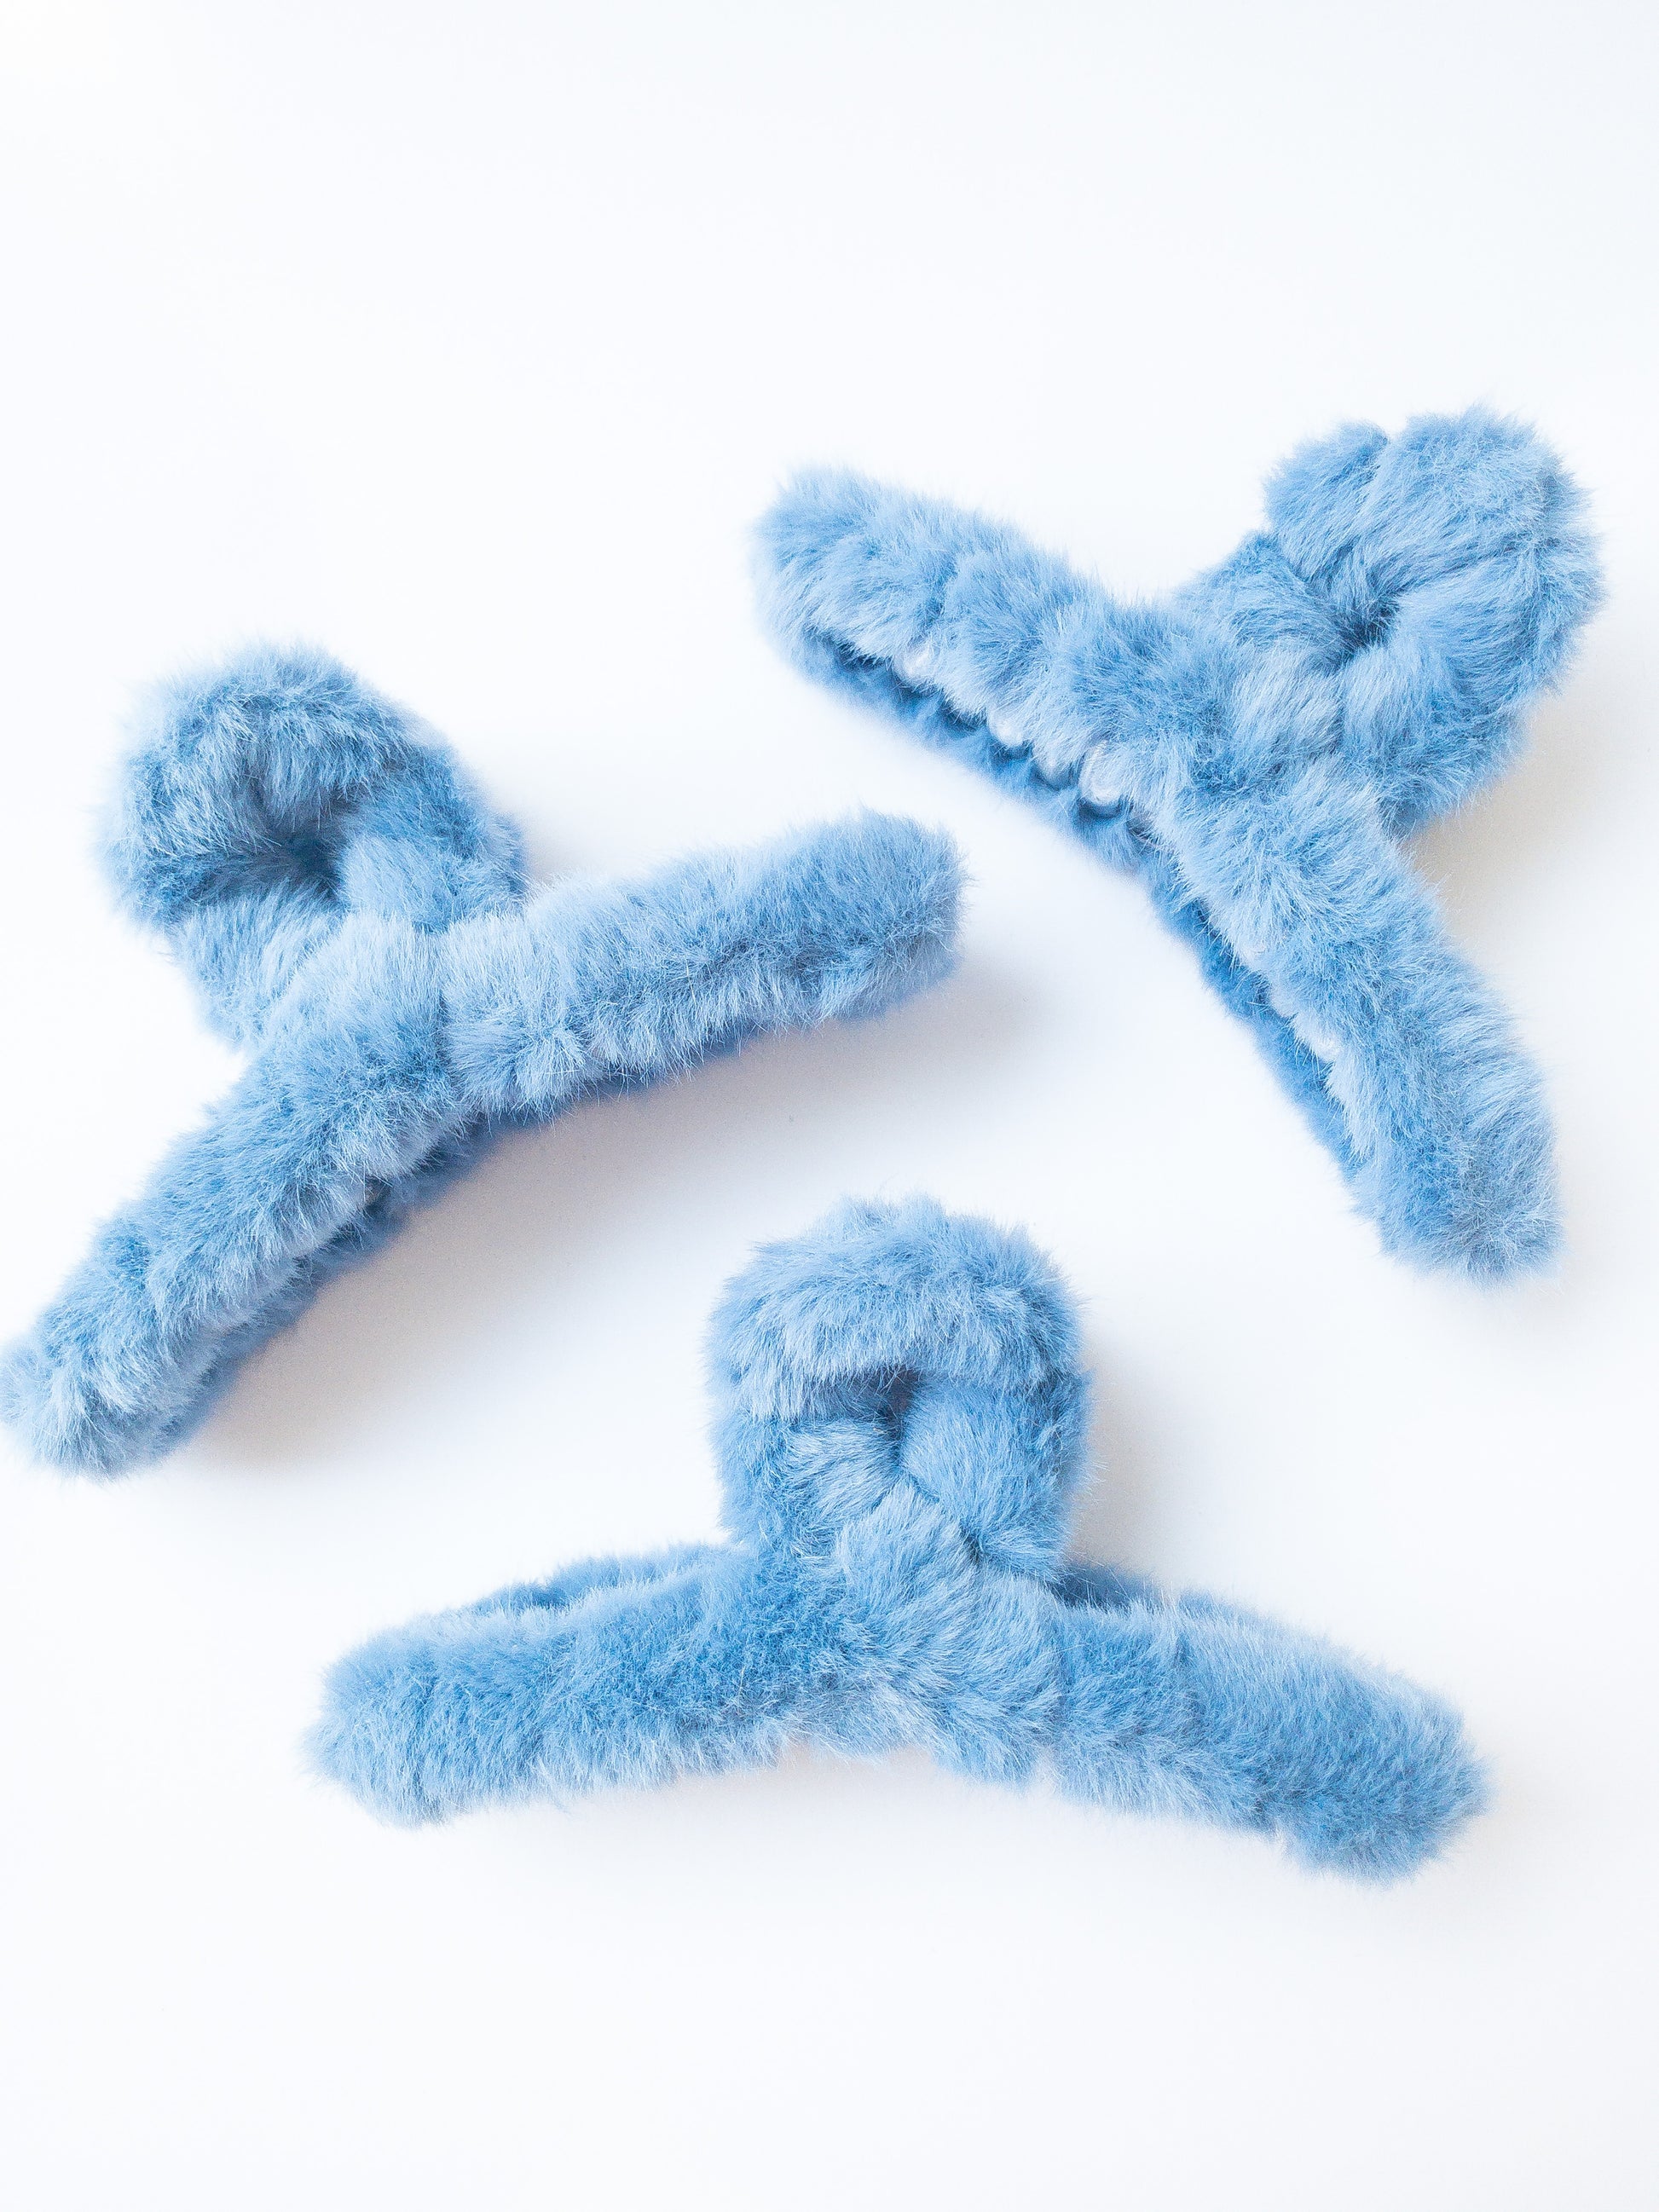 Just pure softness in a hair claw. Each transparent loop hair claw is wrapped in a furry soft blue fabric for those easy to grab, messy hair days.